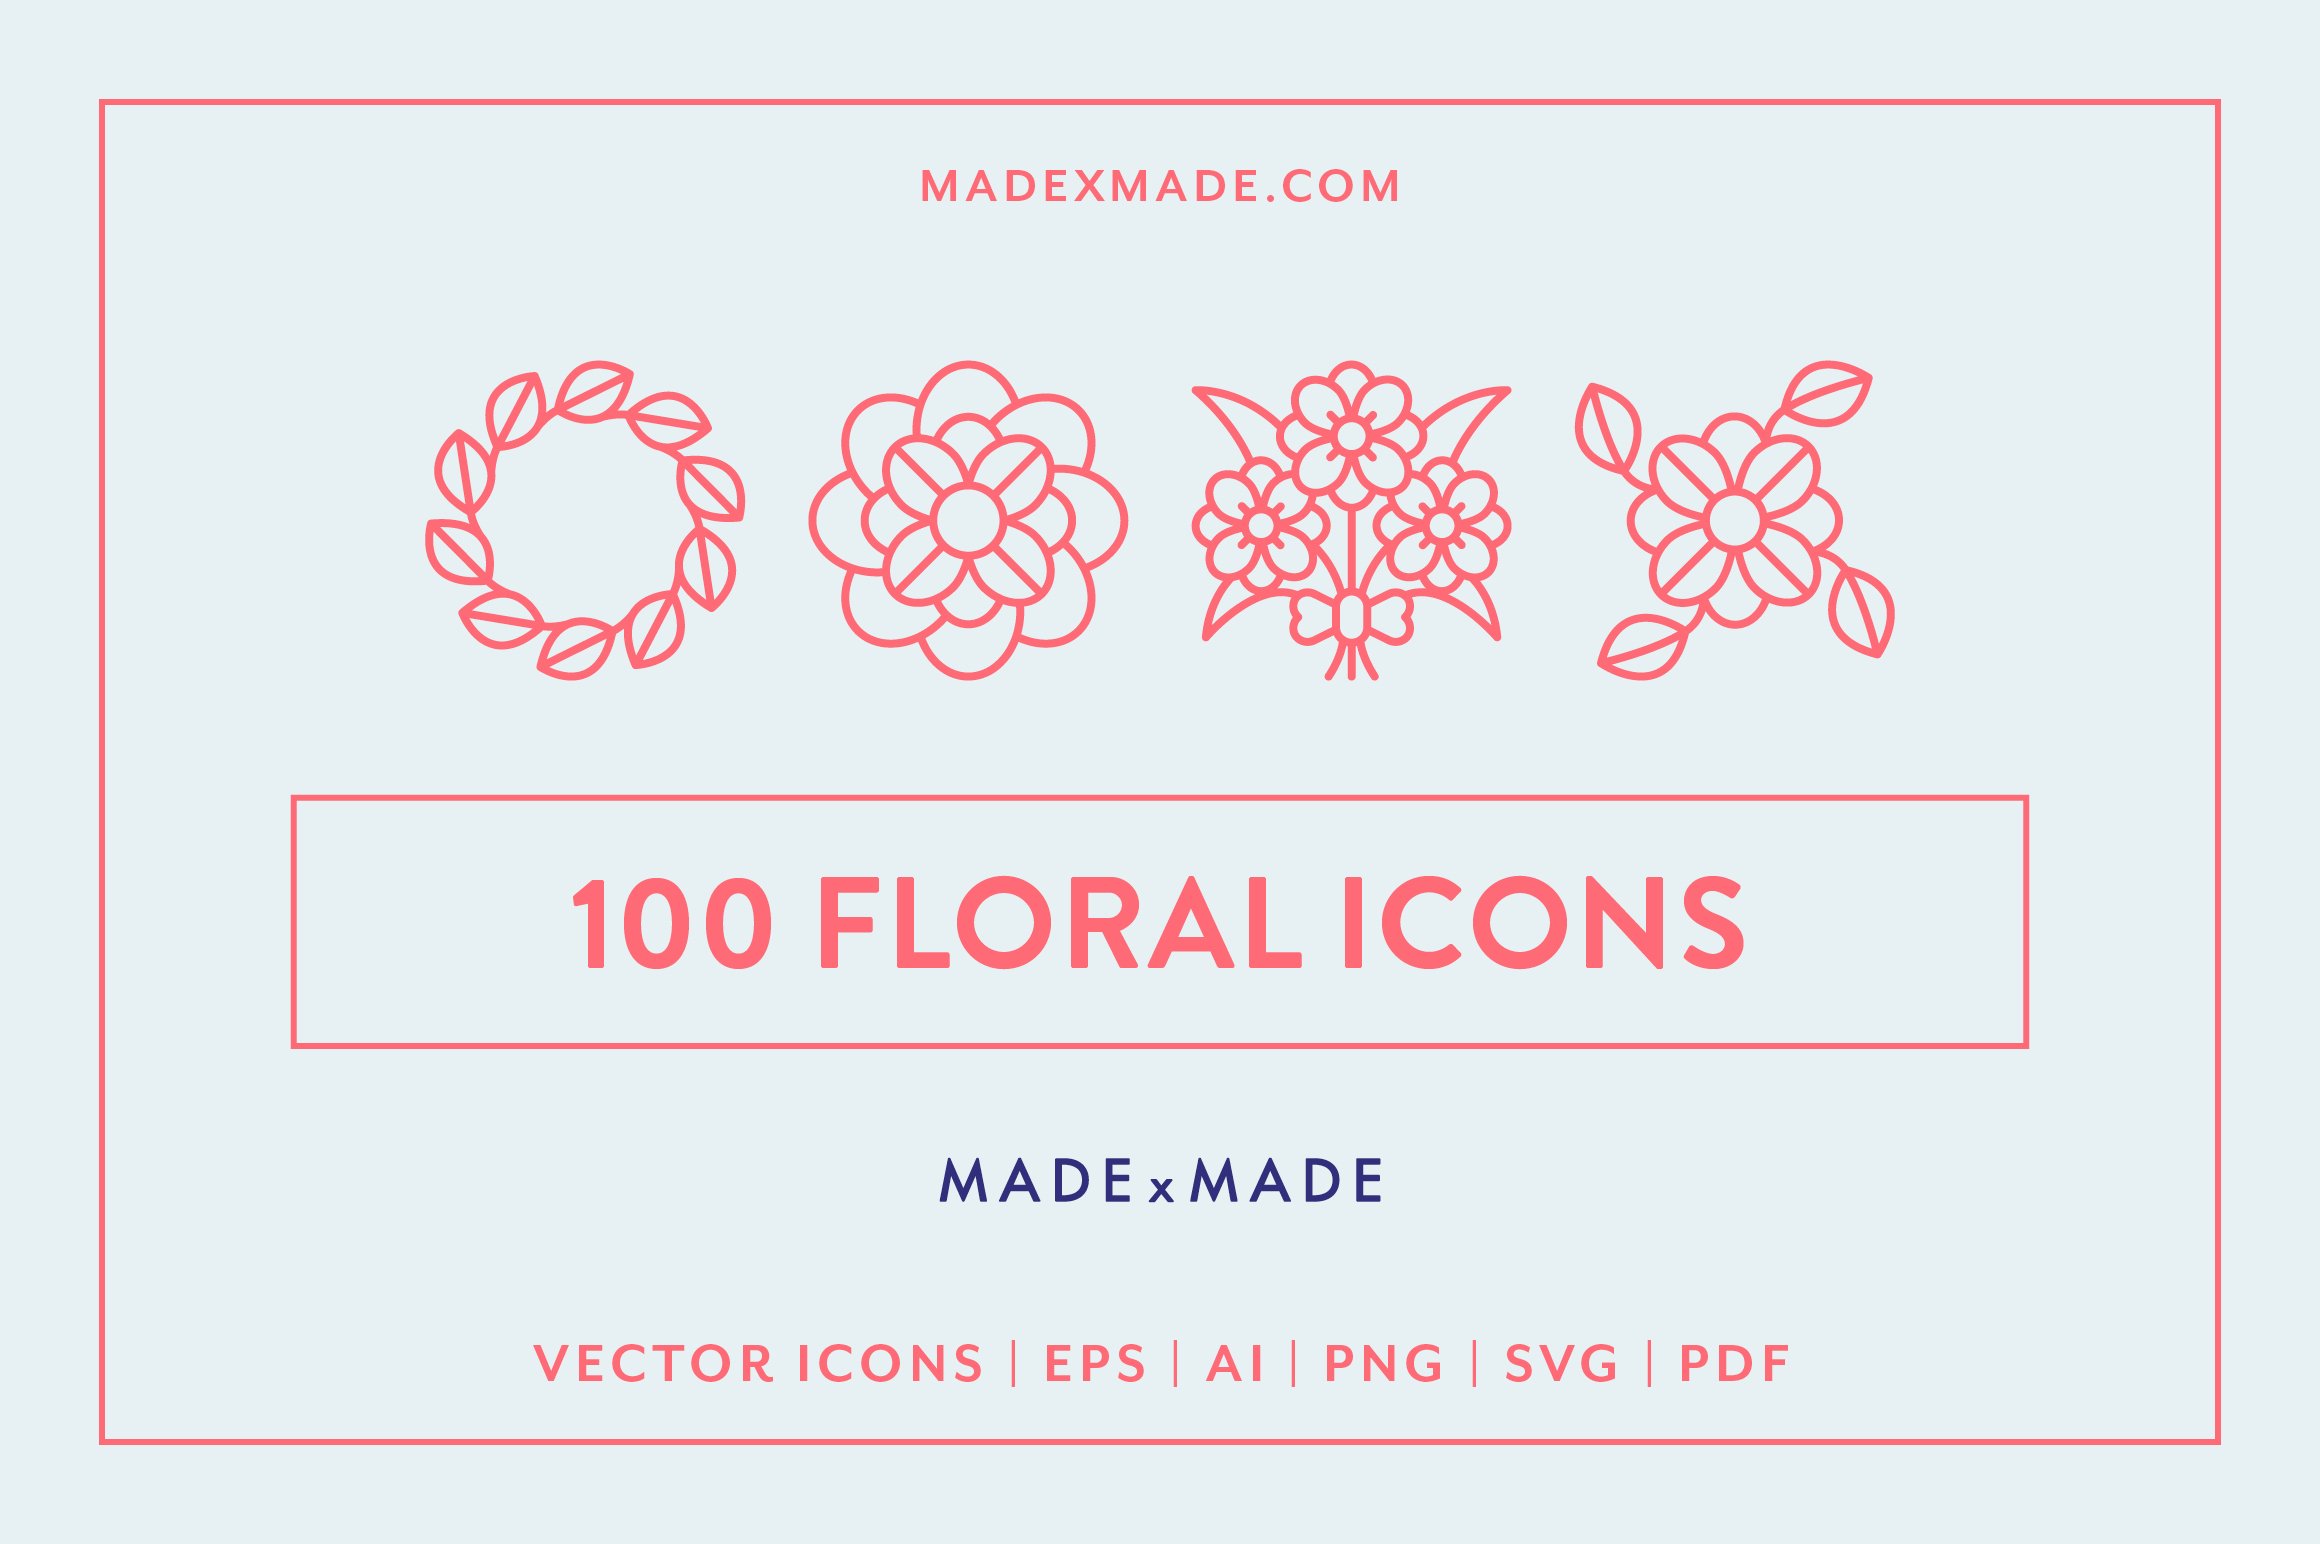 Floral Line Icons cover image.